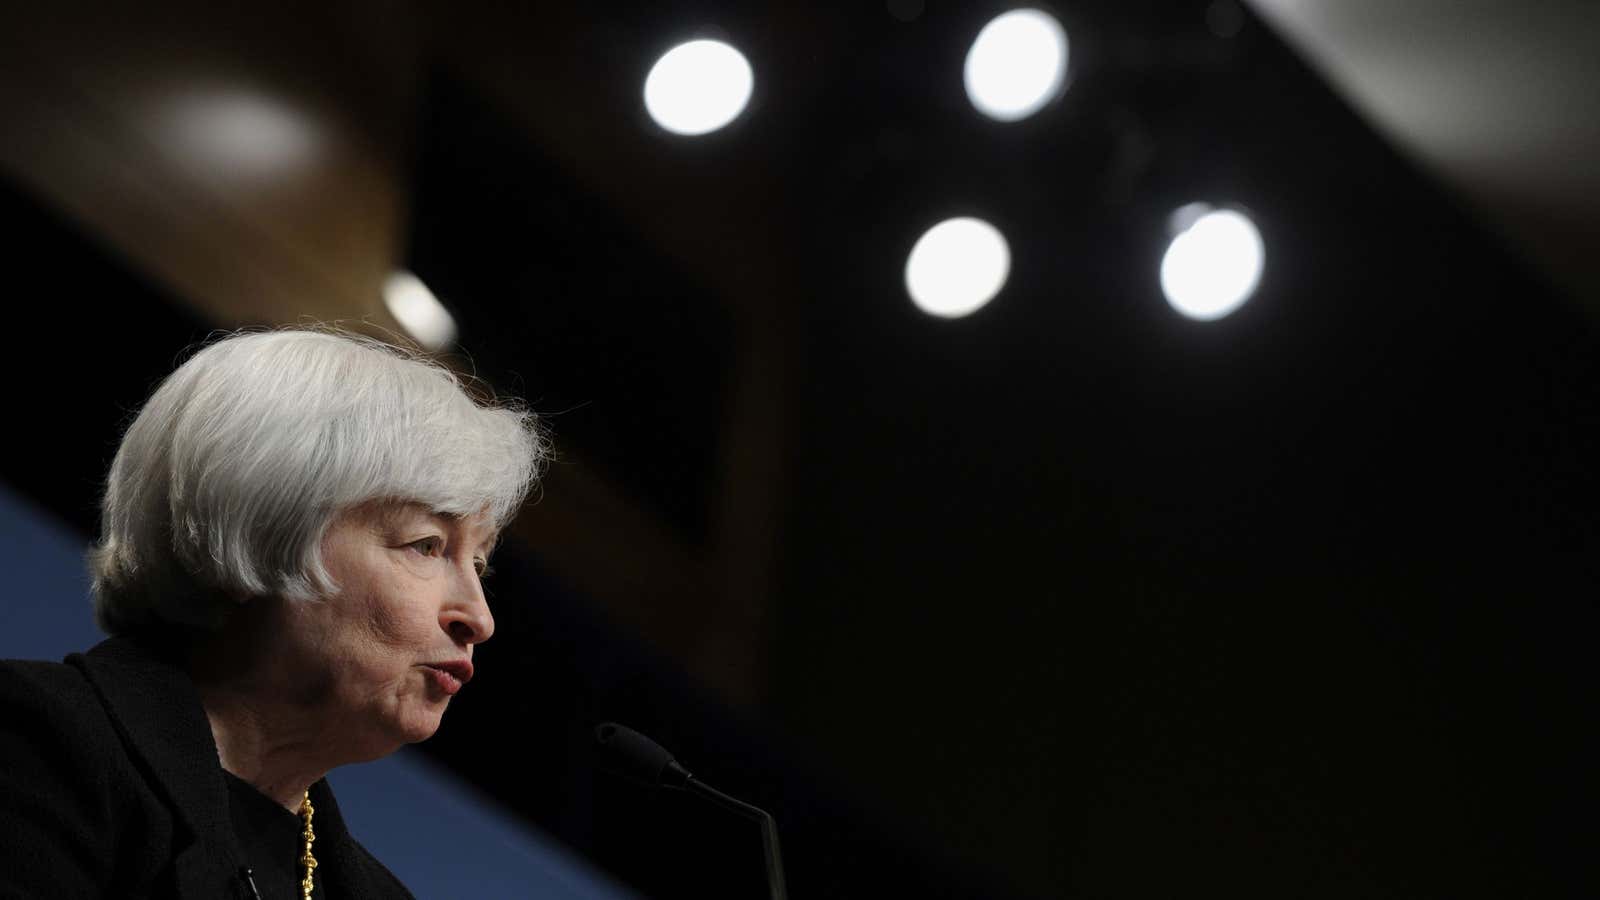 Yellen is directing Wall Street’s attention to wages.